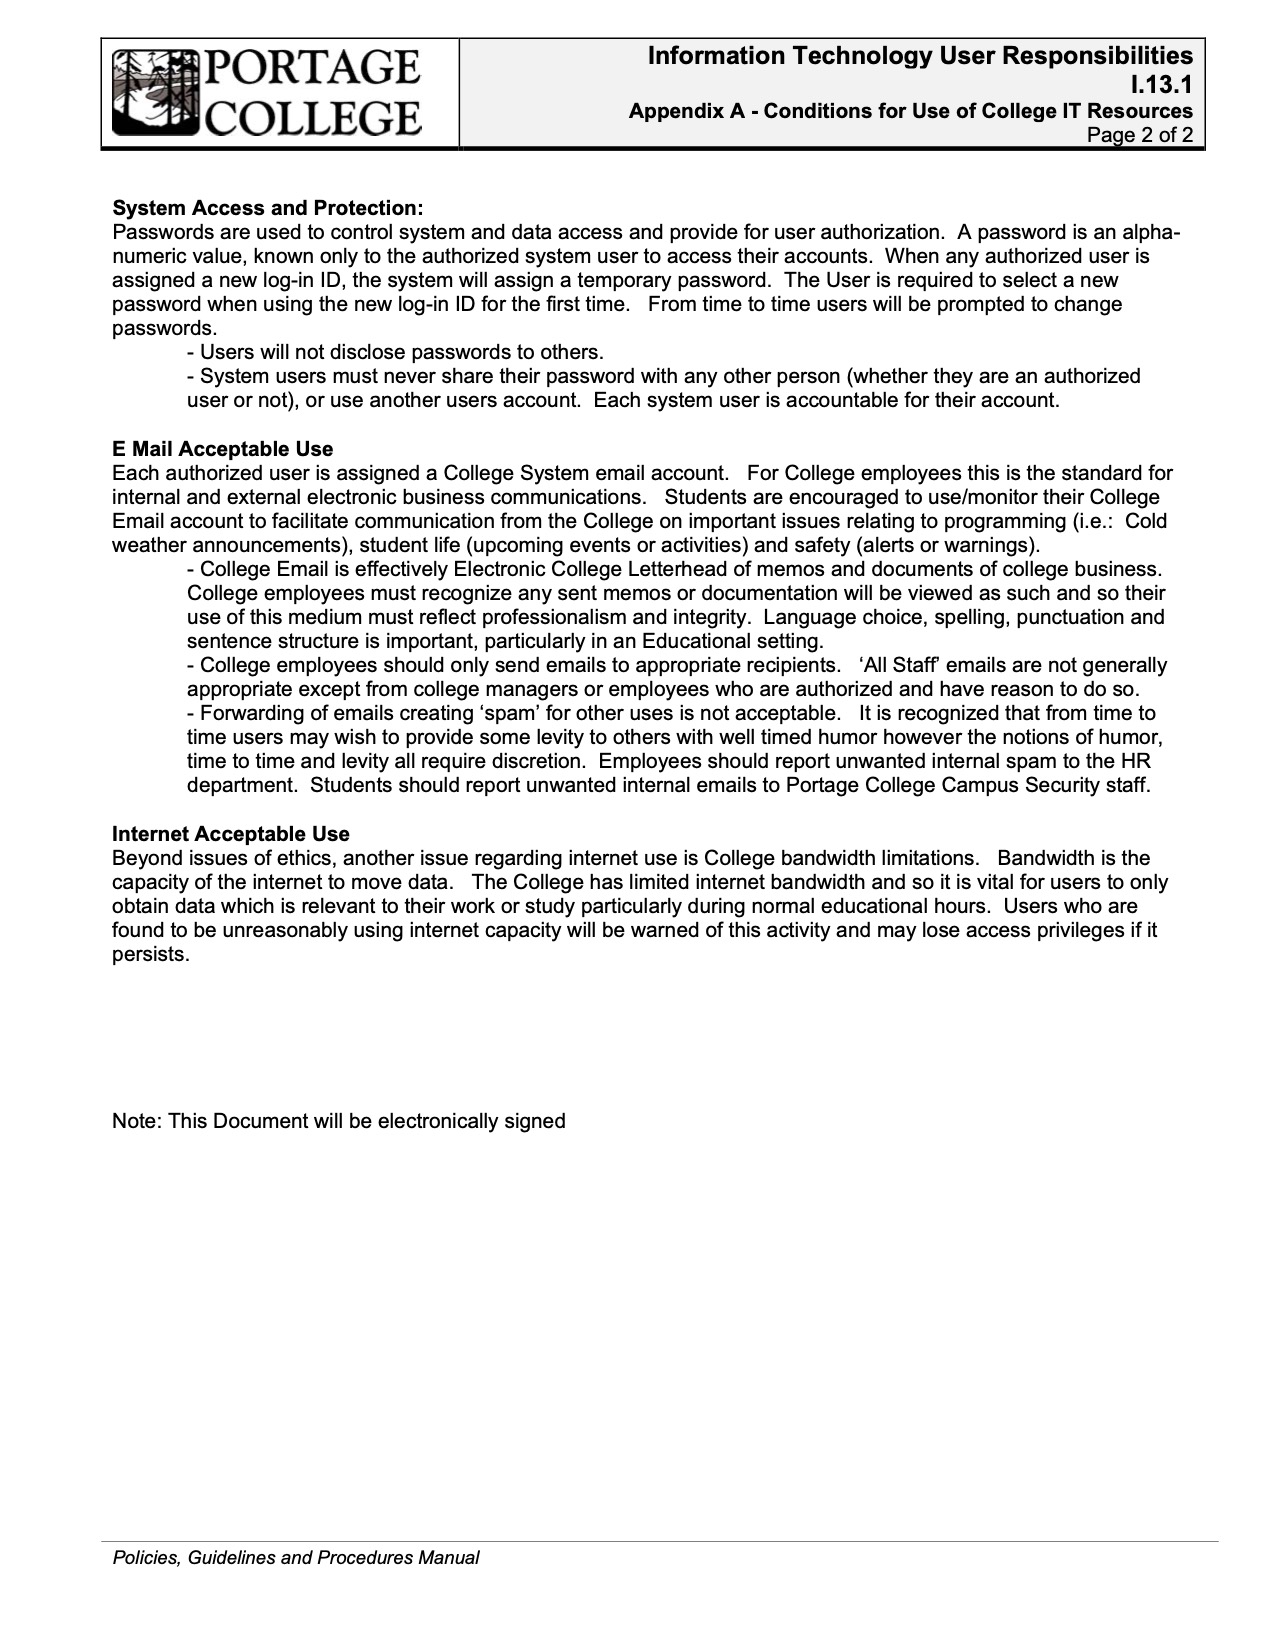 Student Information Technology User Responsibilities pg 2